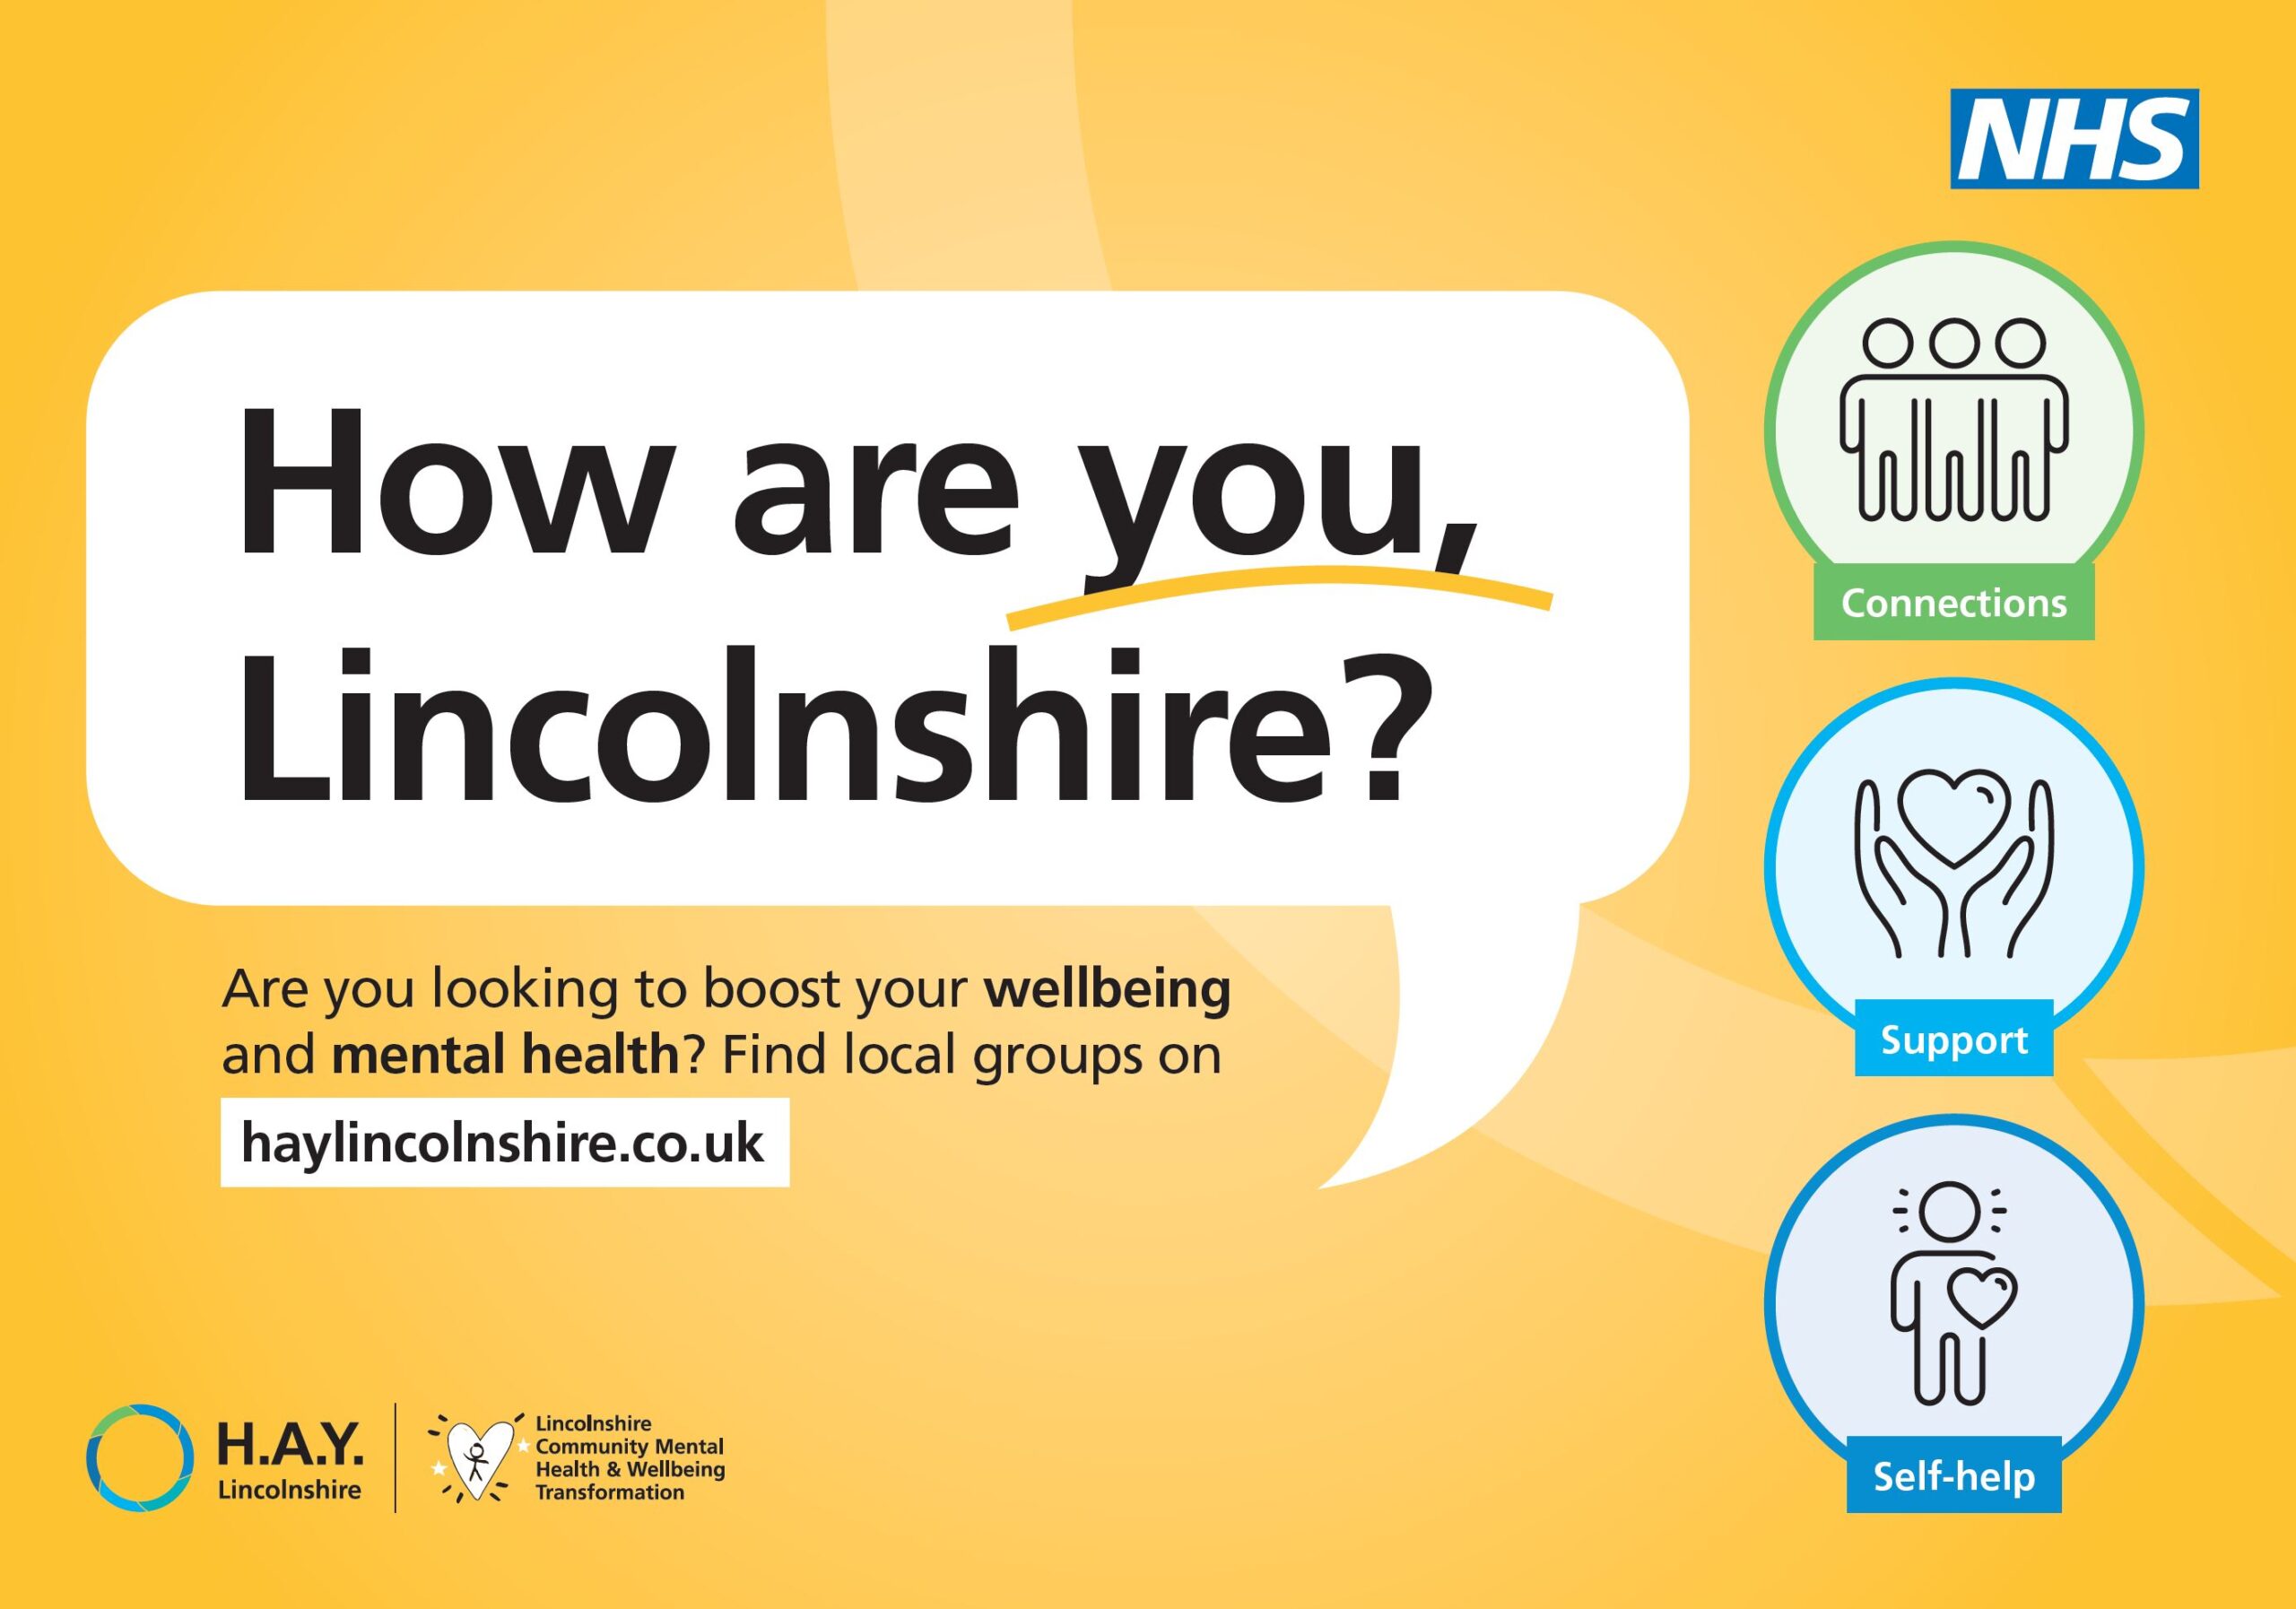 How are you Lincolnshire? Text image with weblink to haylincolnshire.co.uk